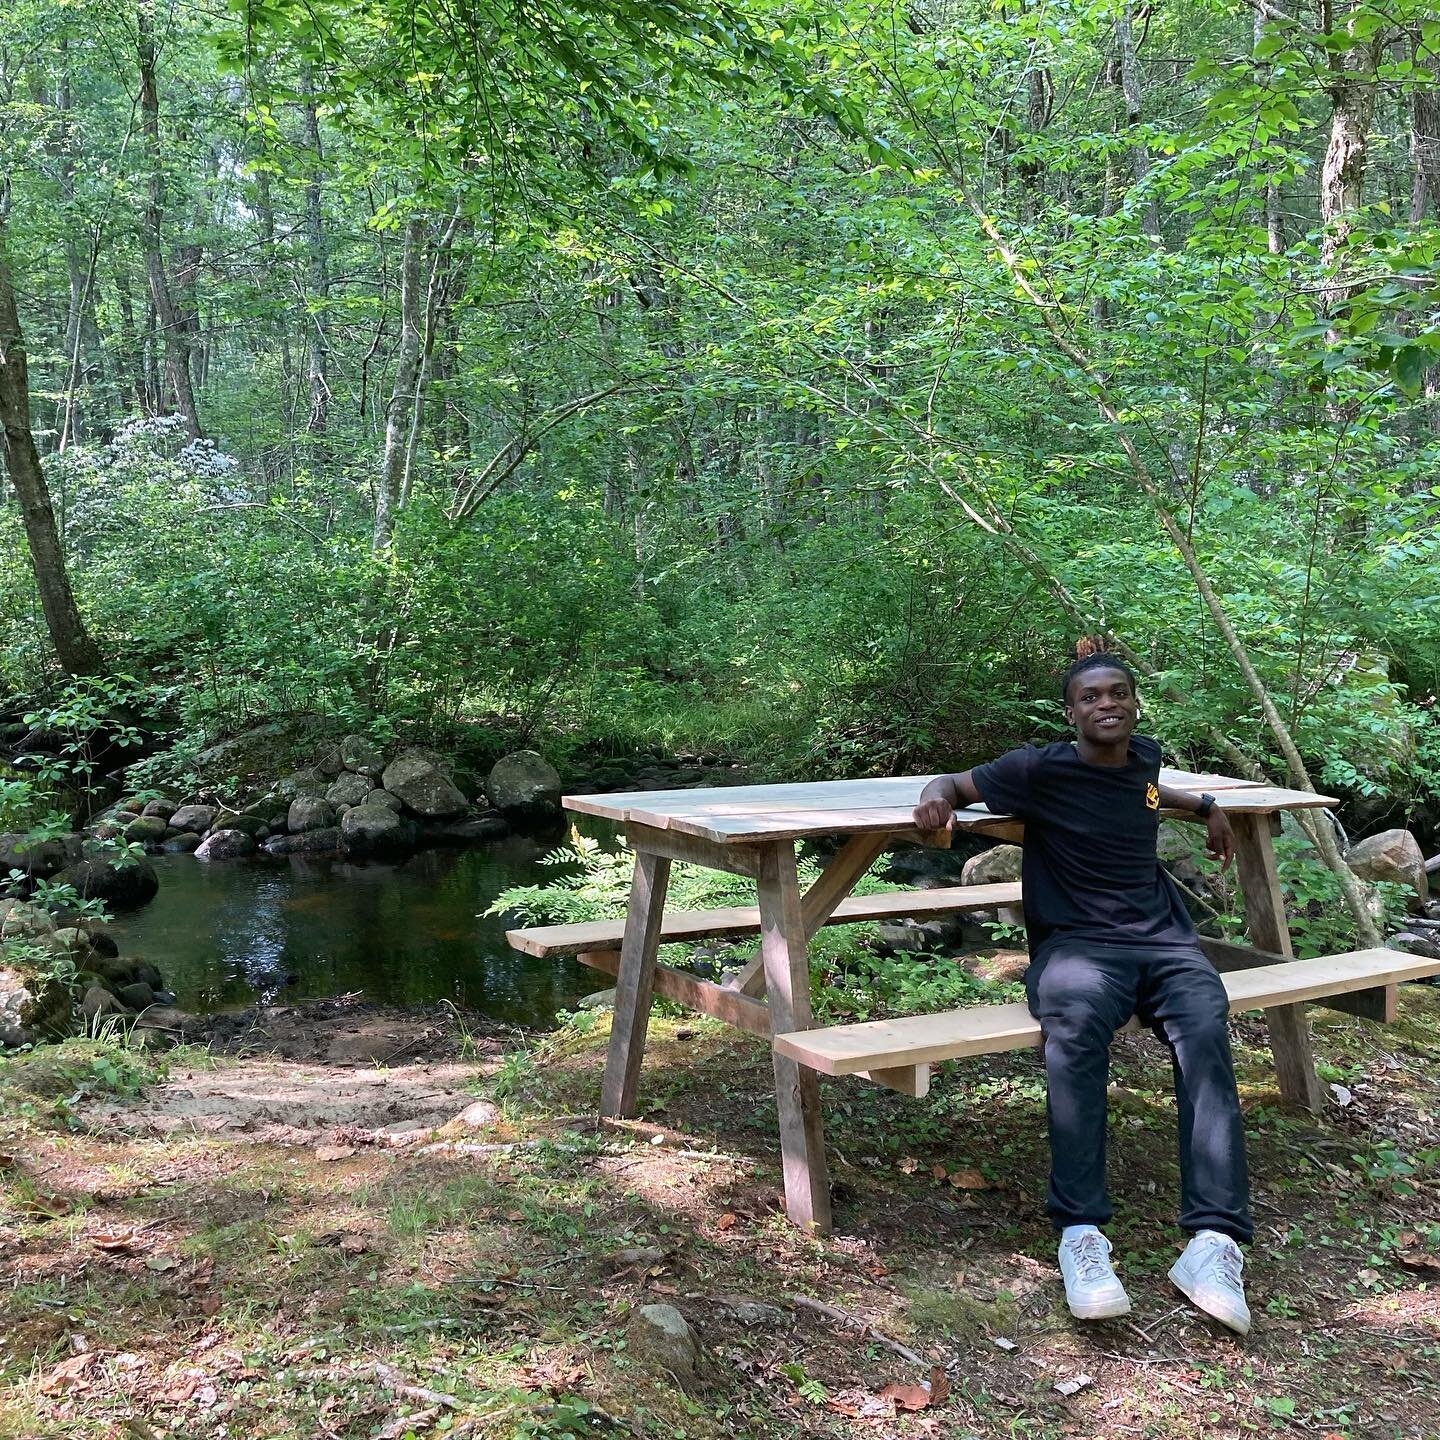 THANK YOU Social Enterprise Greenhouse! Our inclusive summer employment program is now in full swing. Through a micro grant from S.E.G., we were able to hire three talented, dedicated, creative individuals who are practicing eco-forestry. This curren